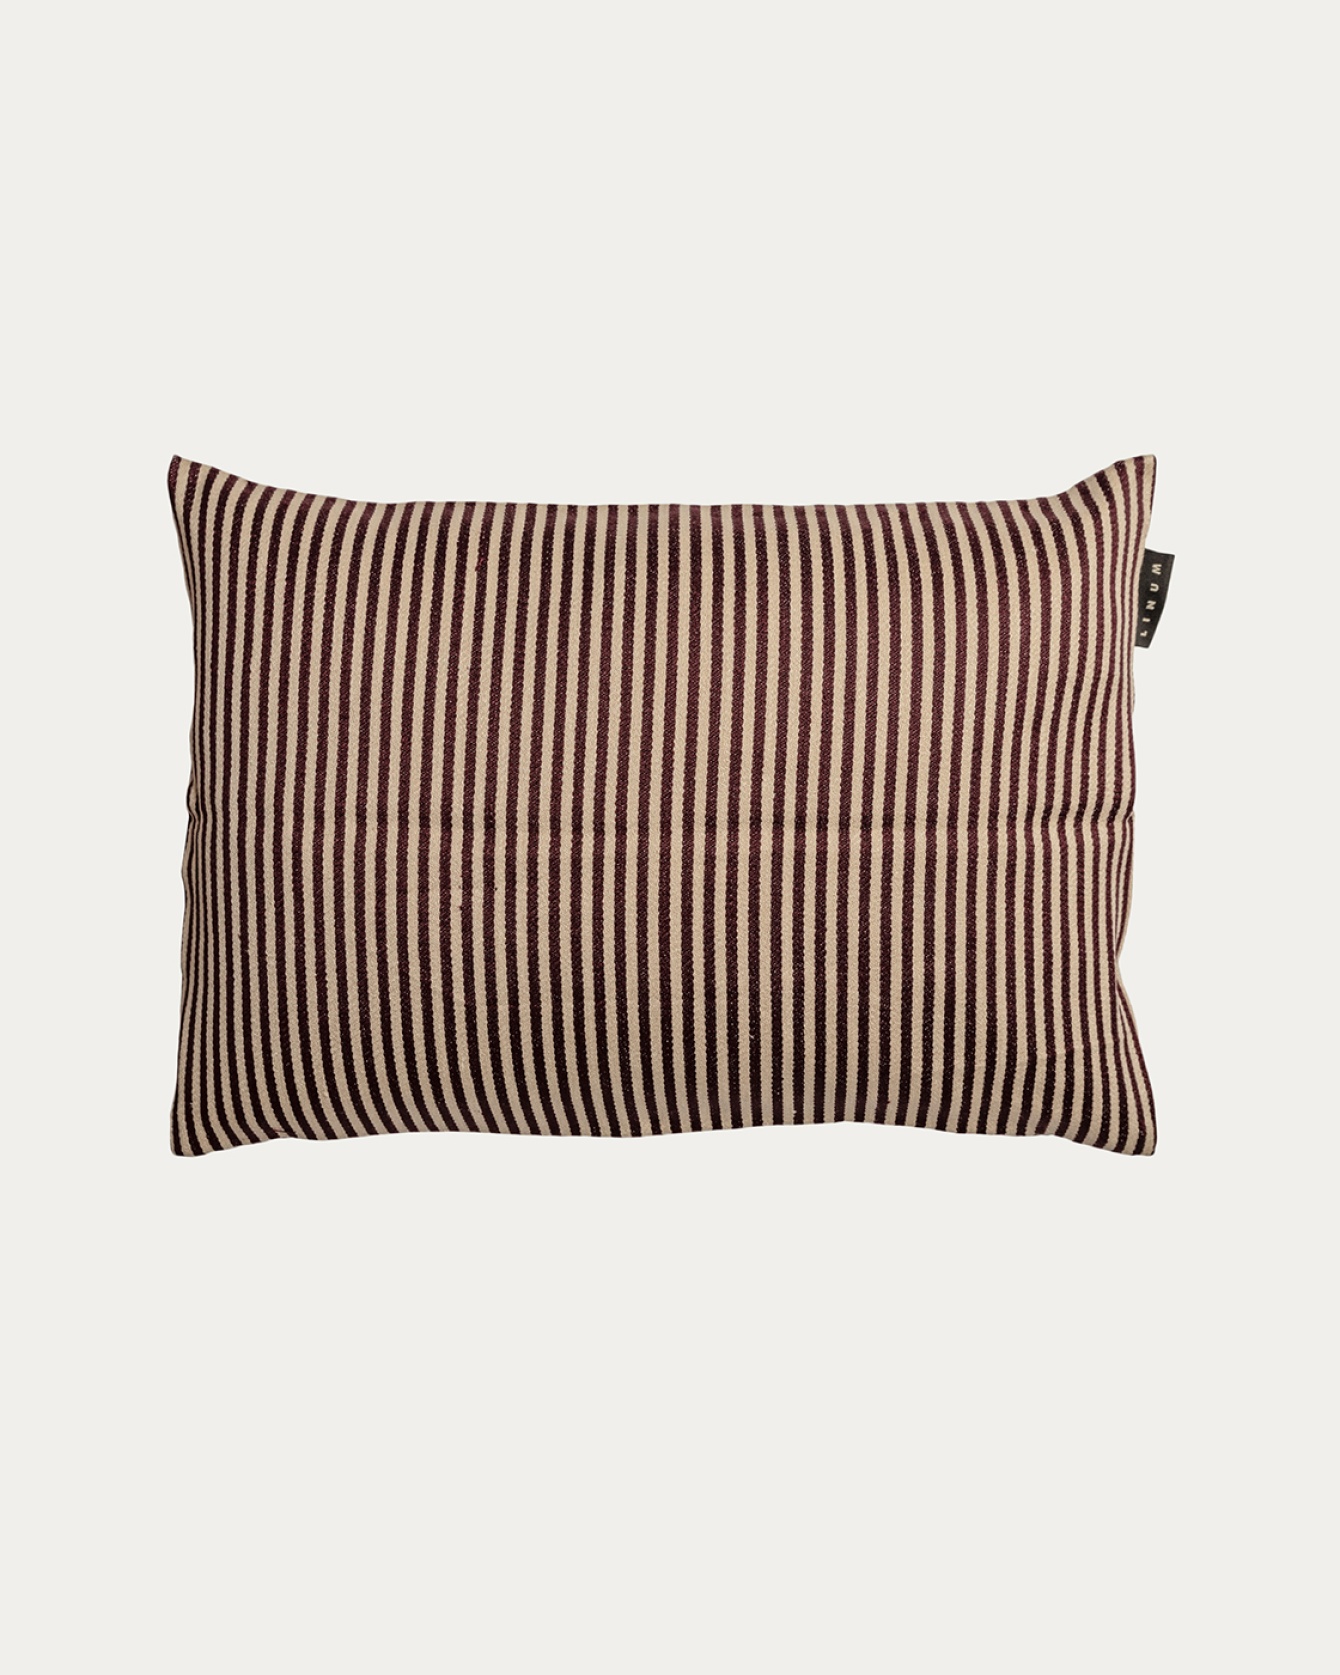 Product image dark burgundy red CALCIO cushion cover with thin stripes of 77% linen and 23% cotton from LINUM DESIGN. Size 35x50 cm.